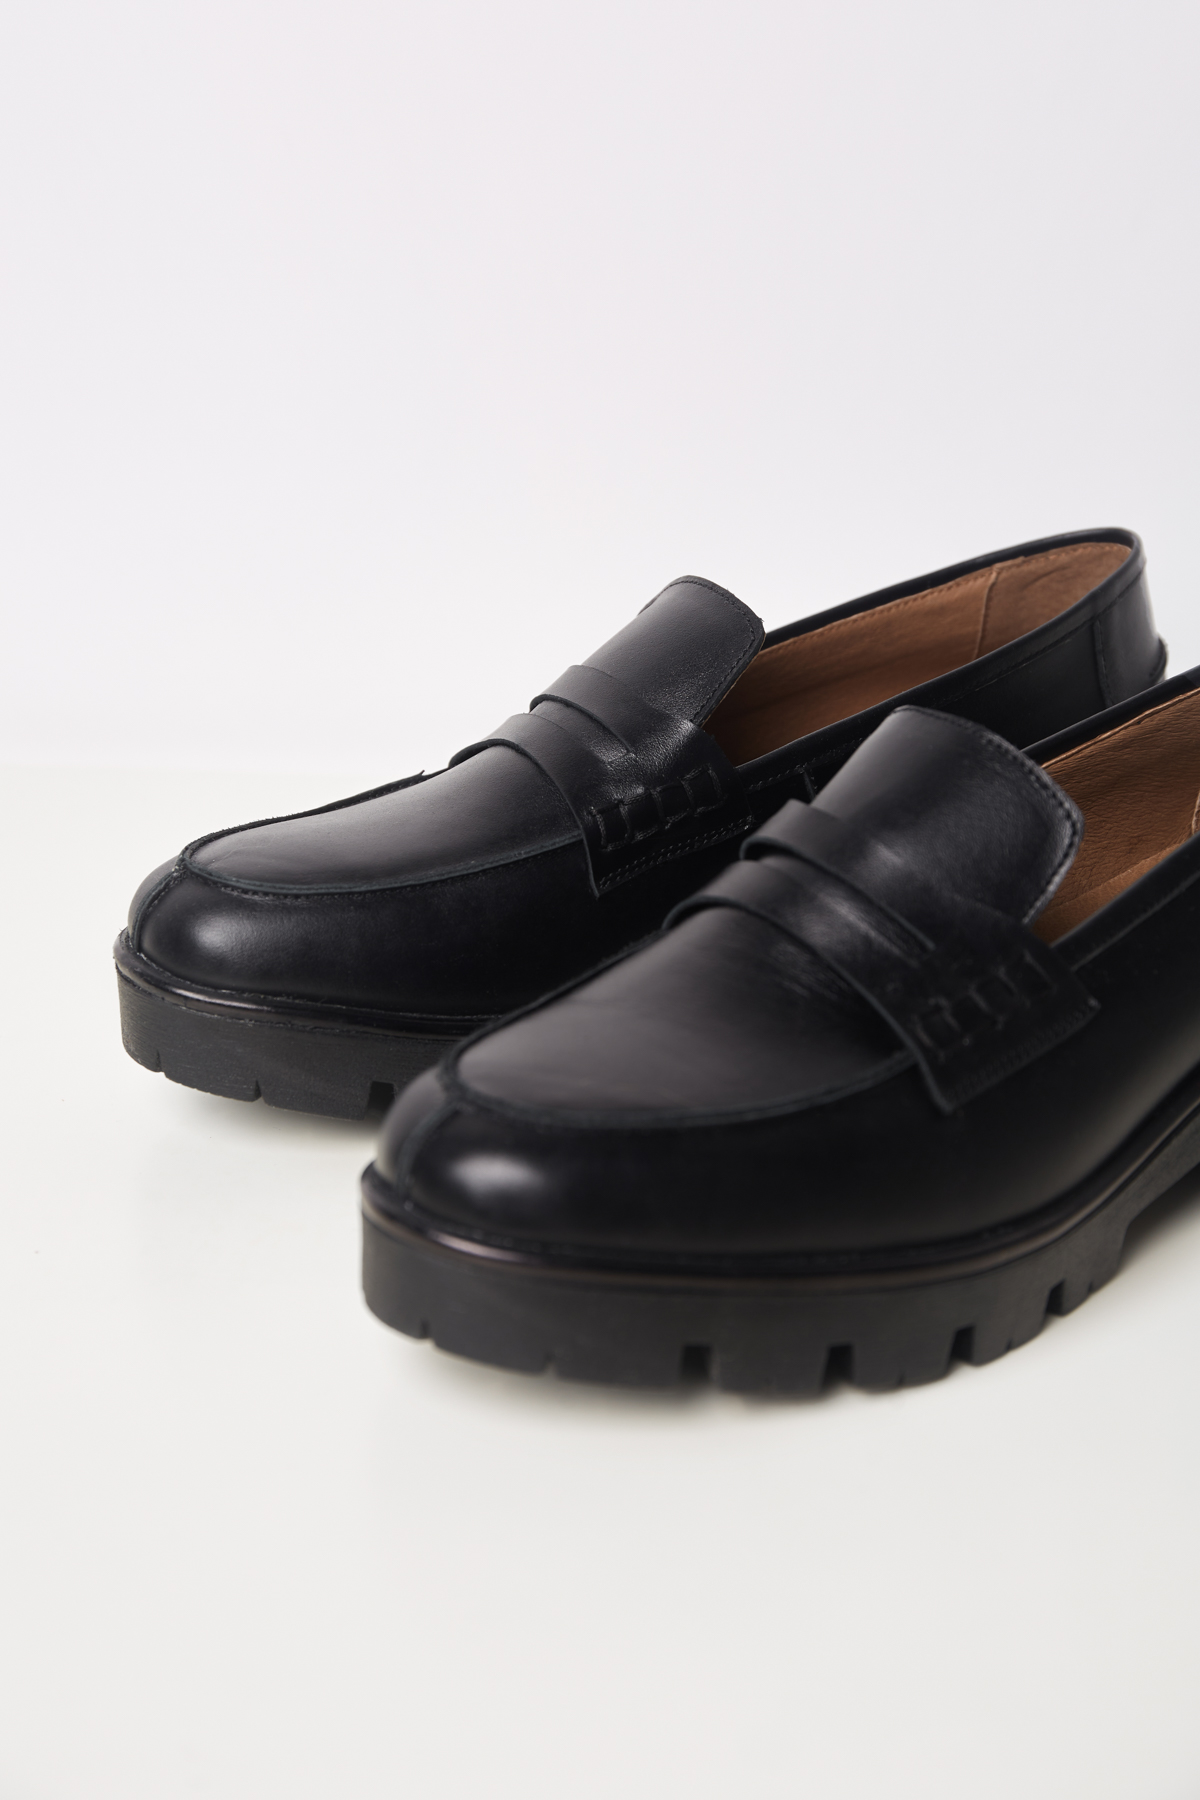 Black genuine leather loafers, photo 4